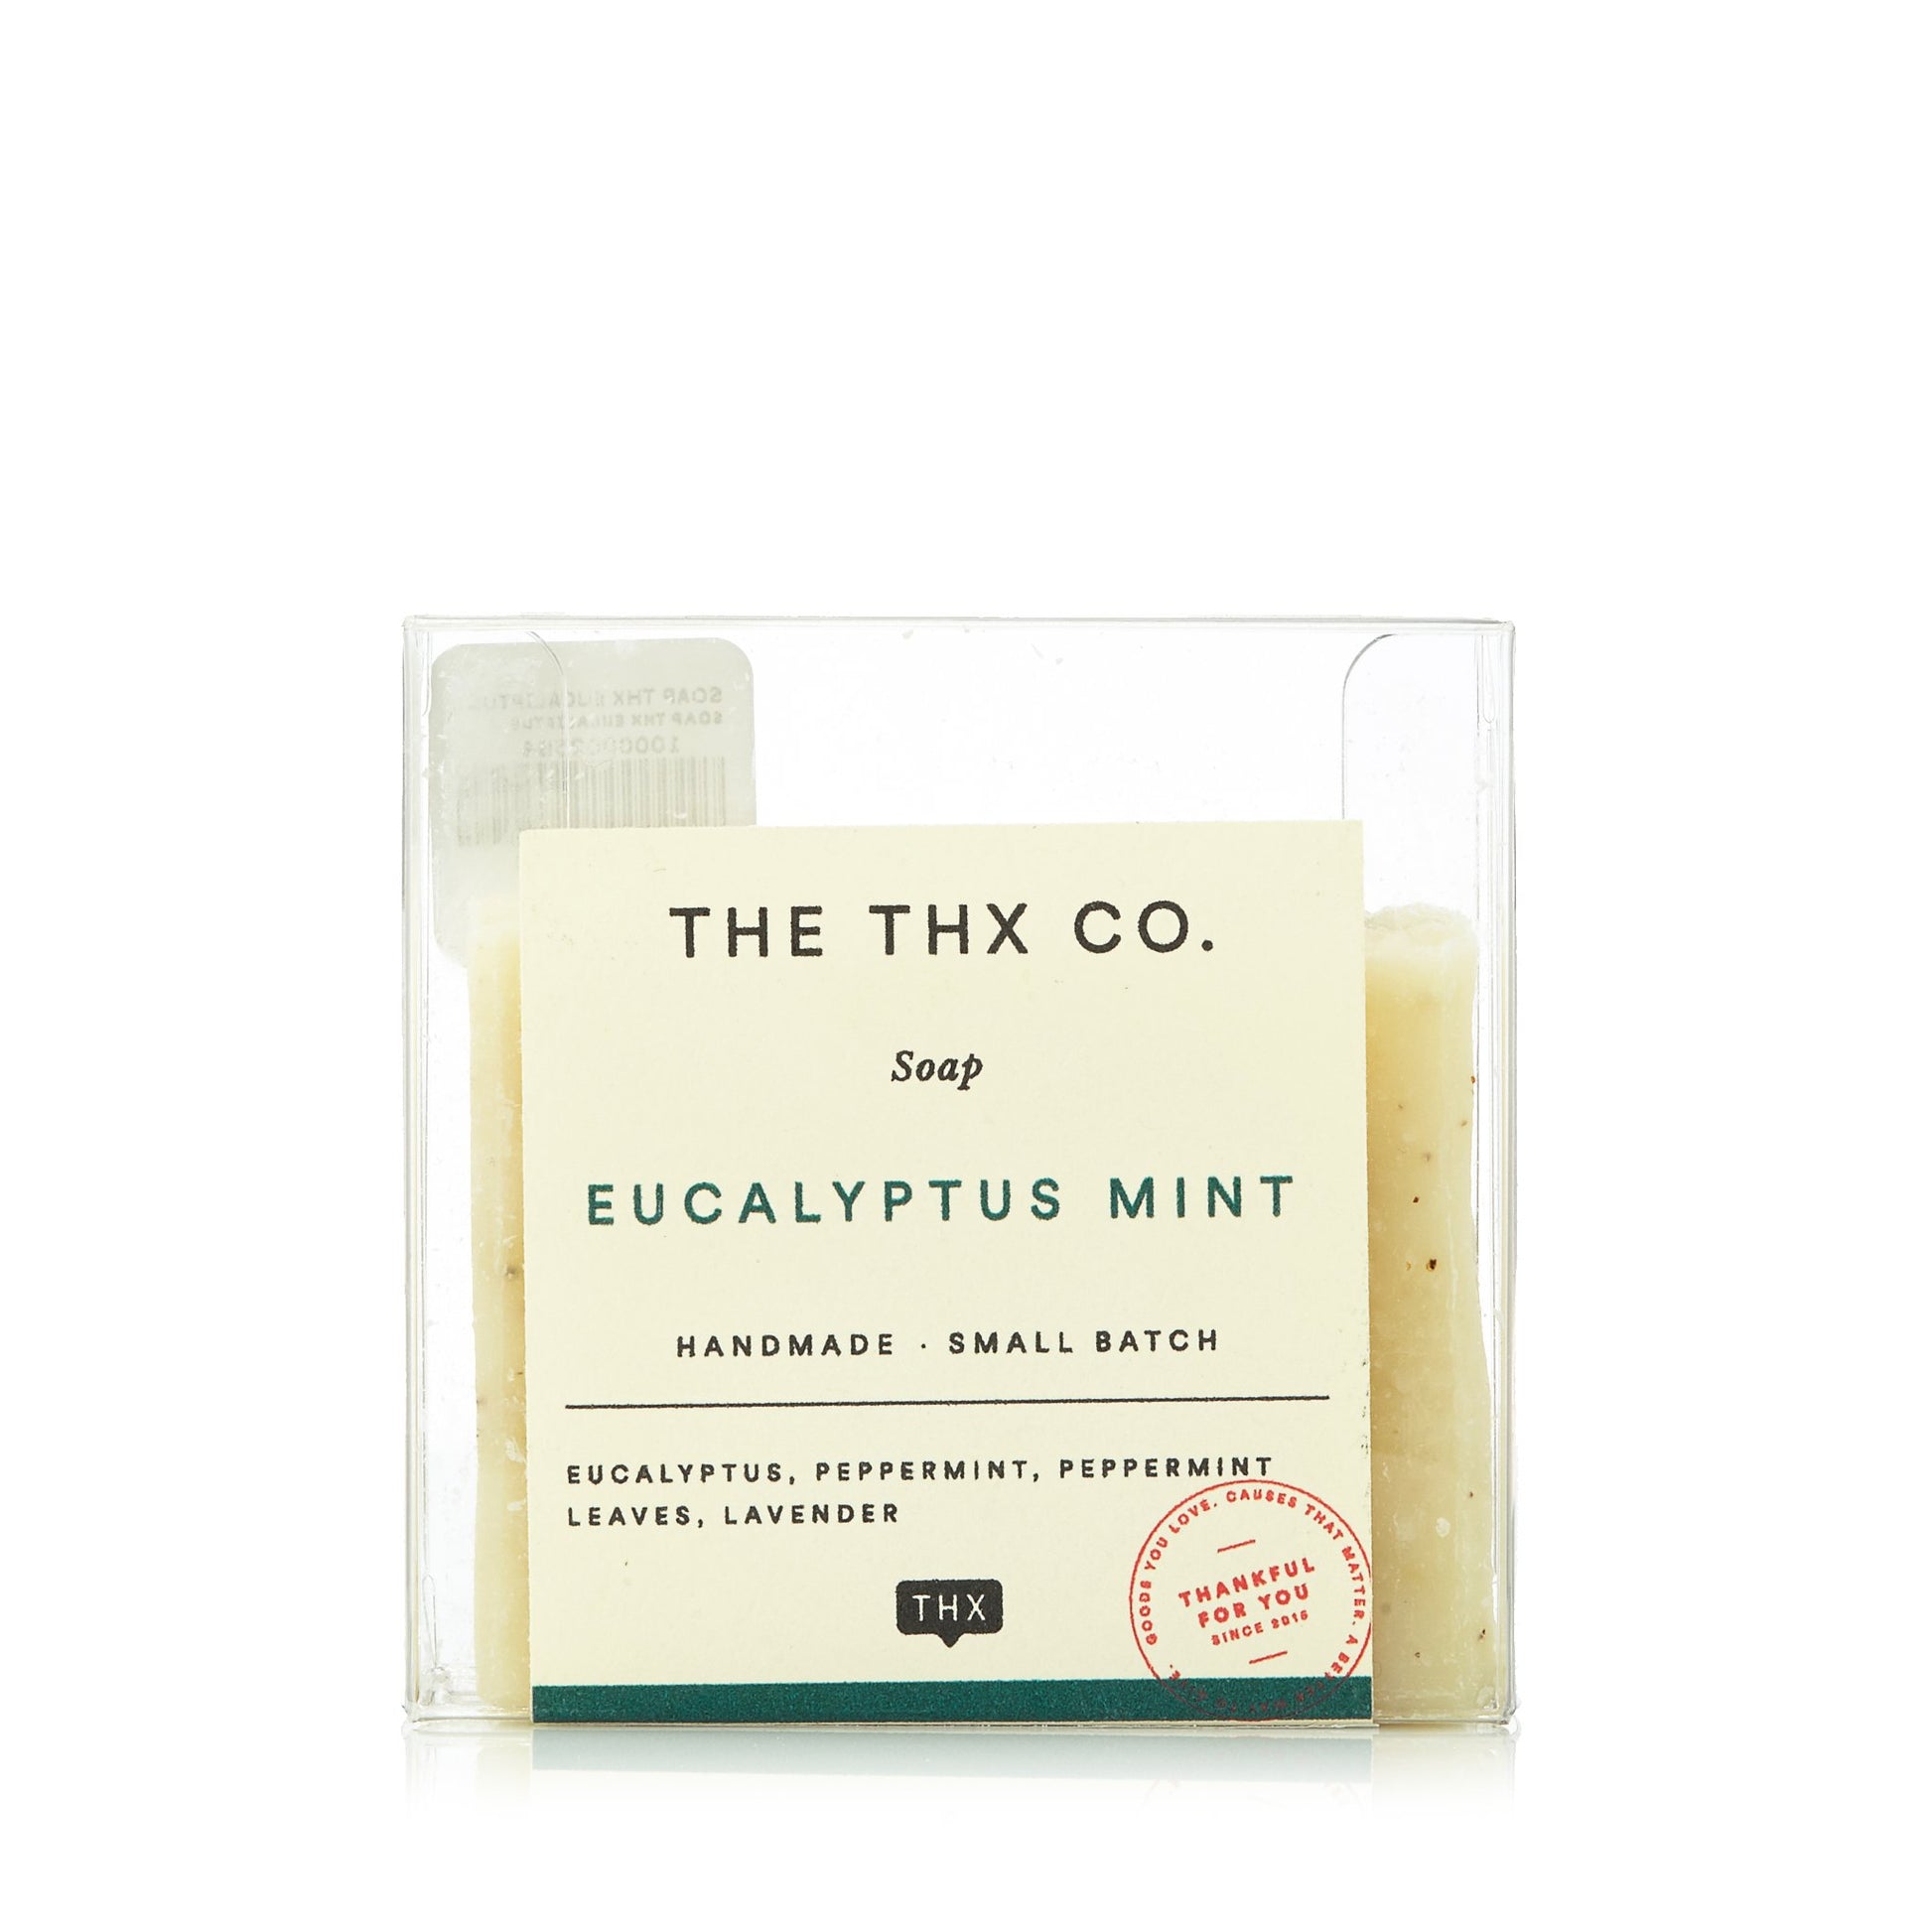 Eucalyptus Mint Hand Made Soap by The Thx Co., Product image 2